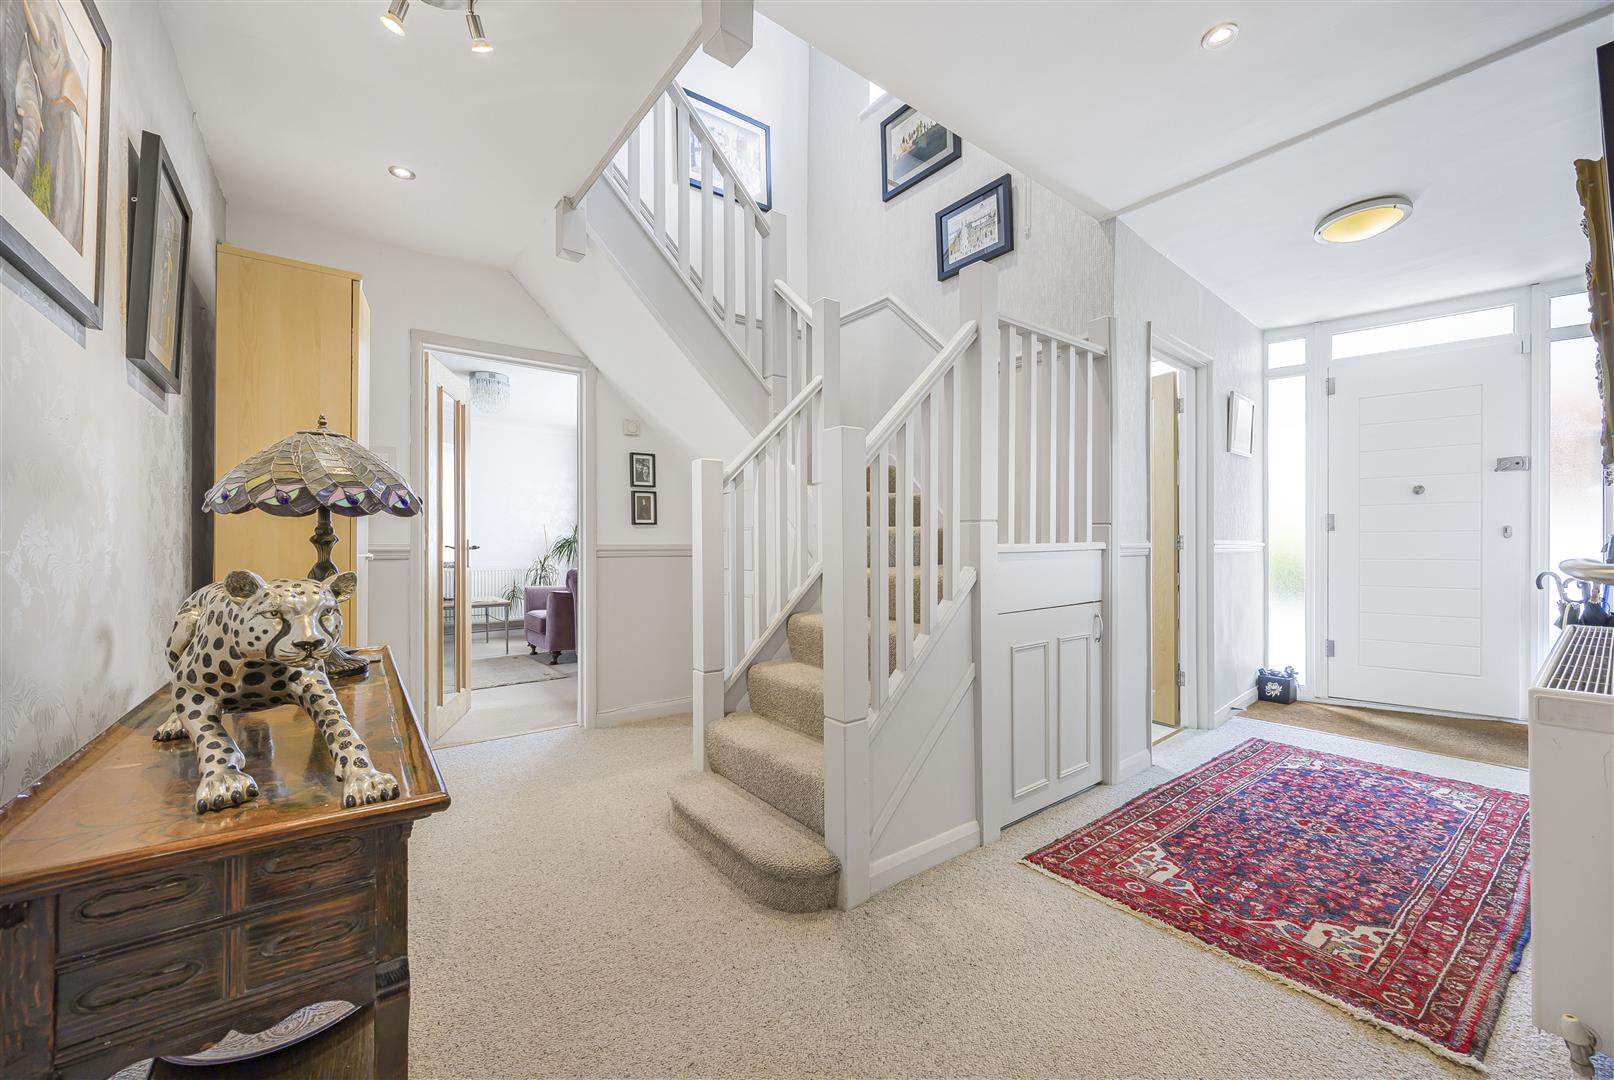 Picton Way Caversham house for sale in Reading